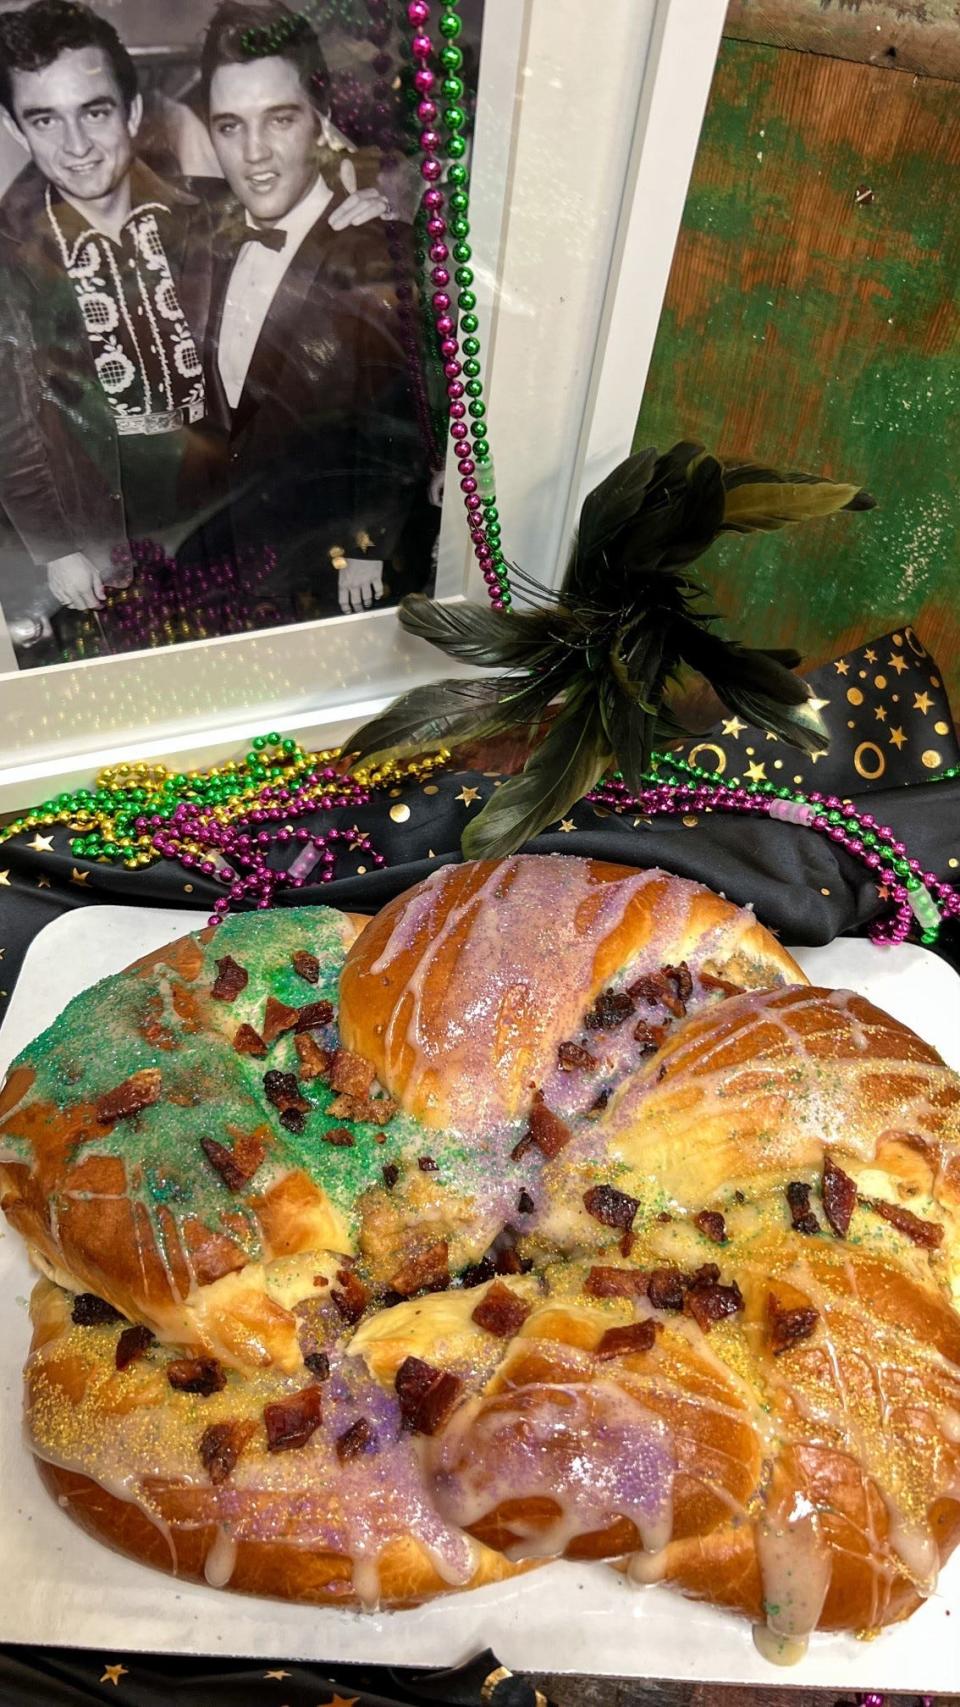 The “King Creole” King Cake ($45 each) at Farm and Fig.  This over-the-top King Cake is filled with banana and peanut butter pastry cream and topped with marshmallow glaze and candied bacon.